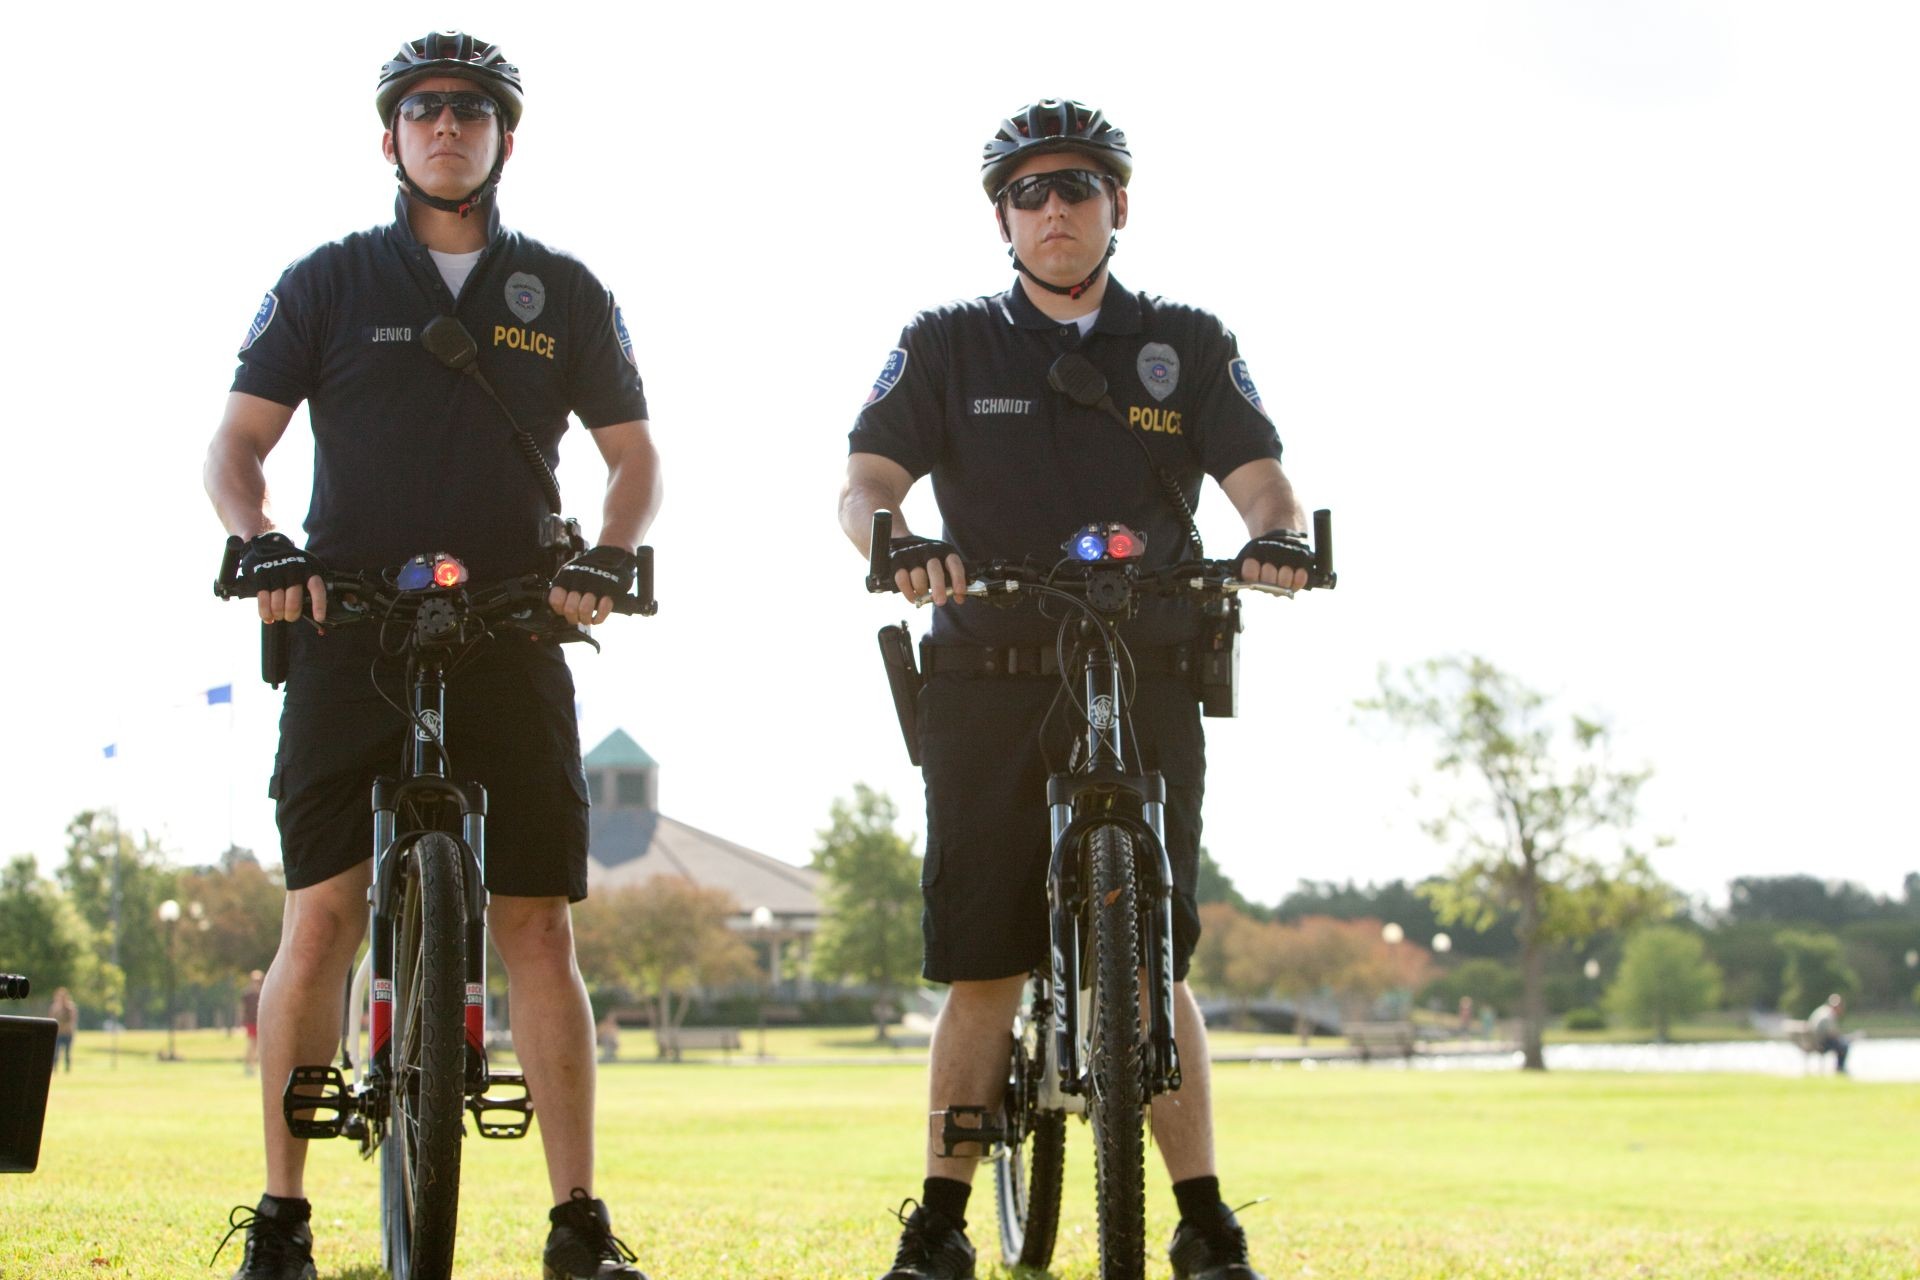 Channing Tatum stars as Jenko and Jonah Hill stars as Schmidt in Columbia Pictures' 21 Jump Street (2012)